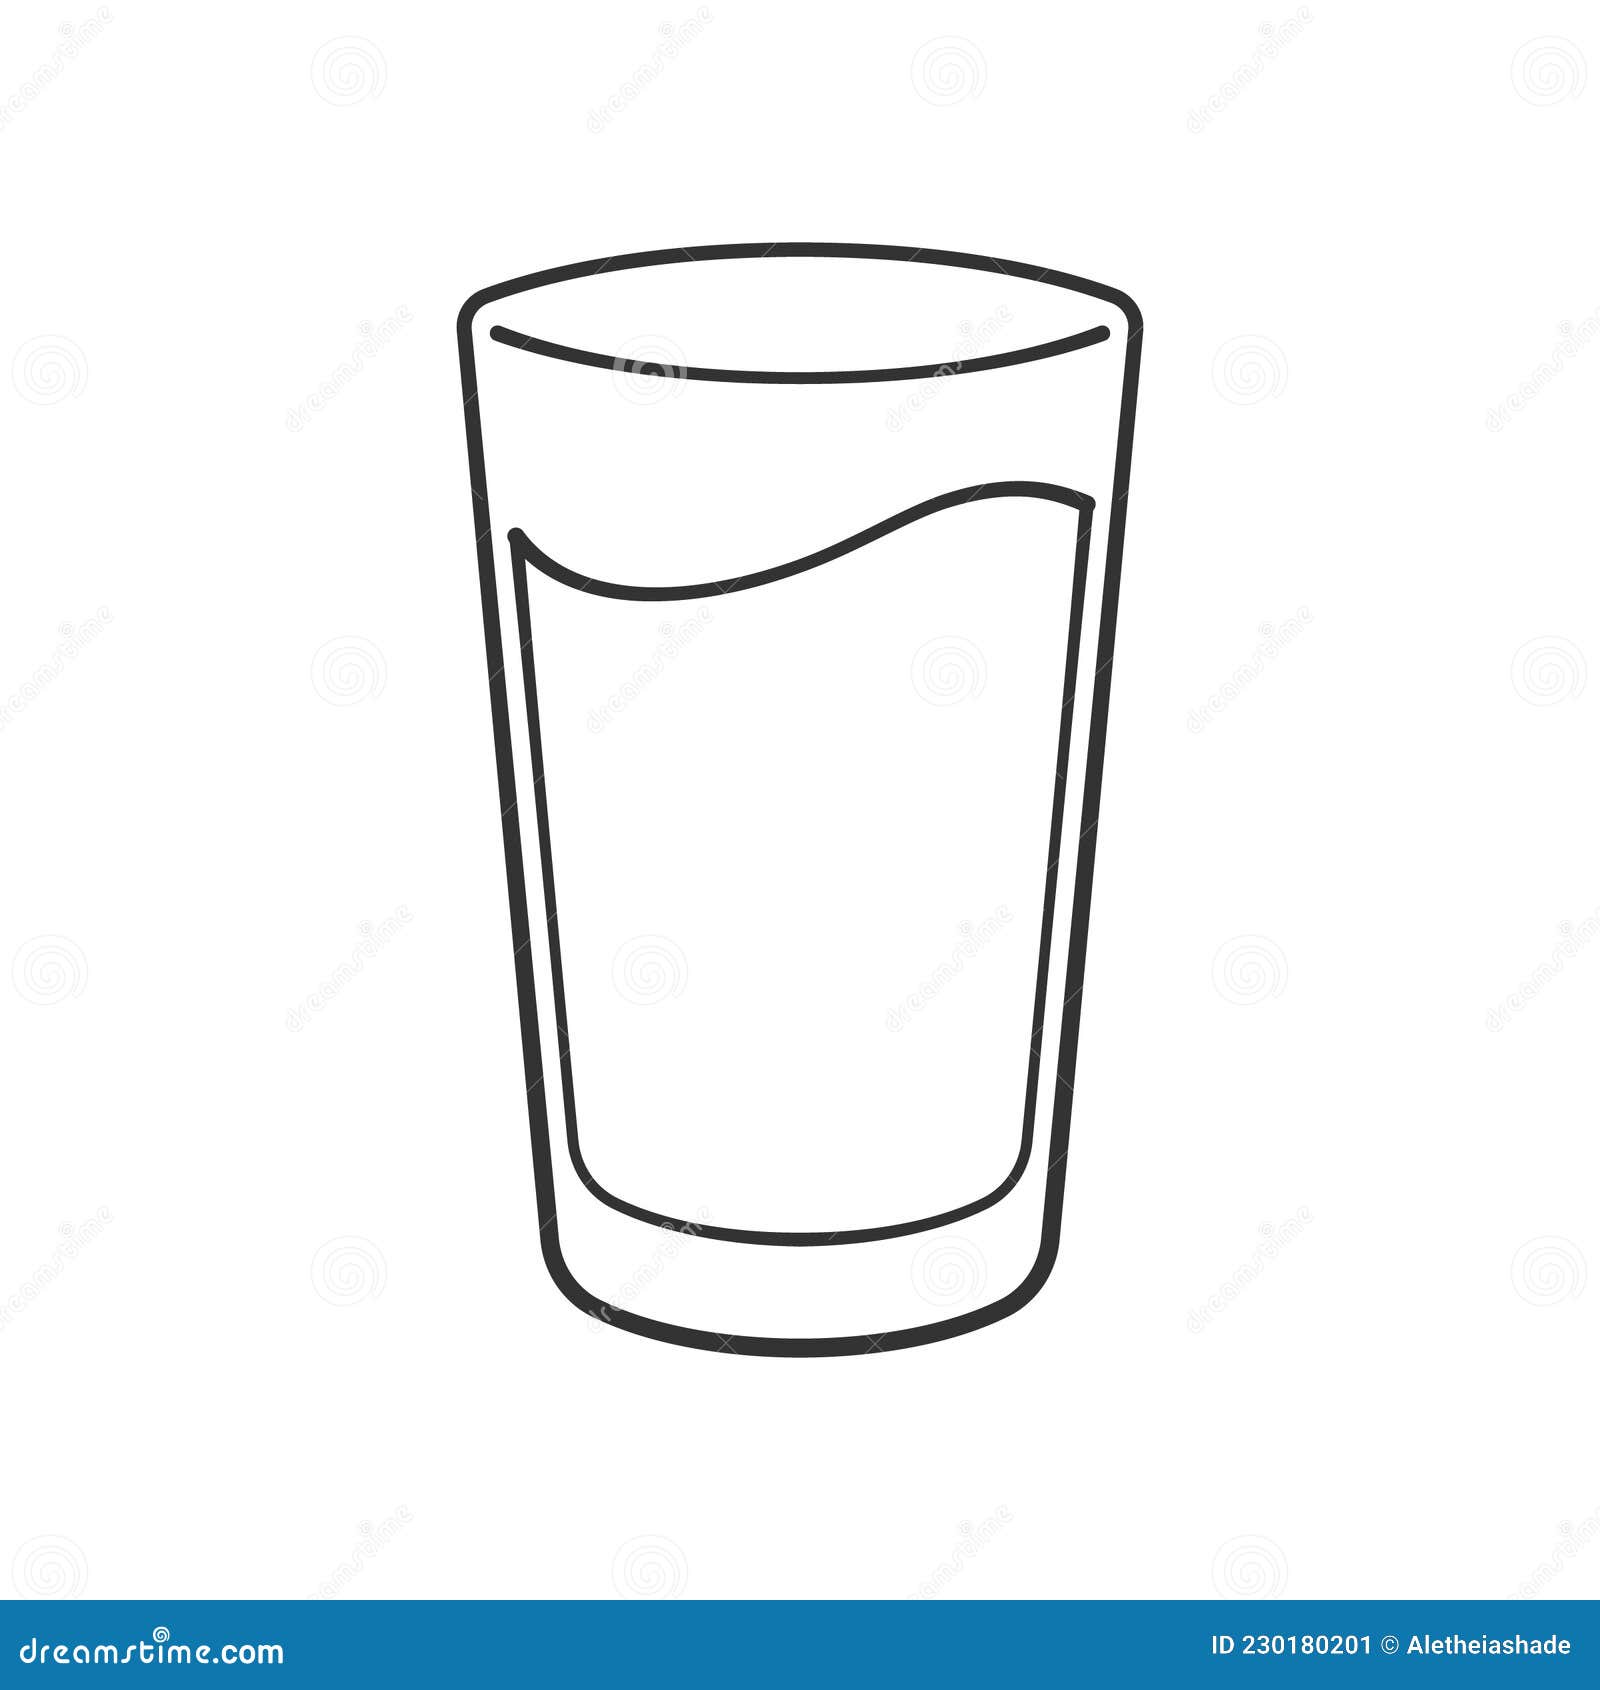 https://thumbs.dreamstime.com/z/tall-glass-cup-full-water-liquid-outline-clipart-tall-glass-cup-full-water-liquid-outline-clipart-element-simple-flat-230180201.jpg